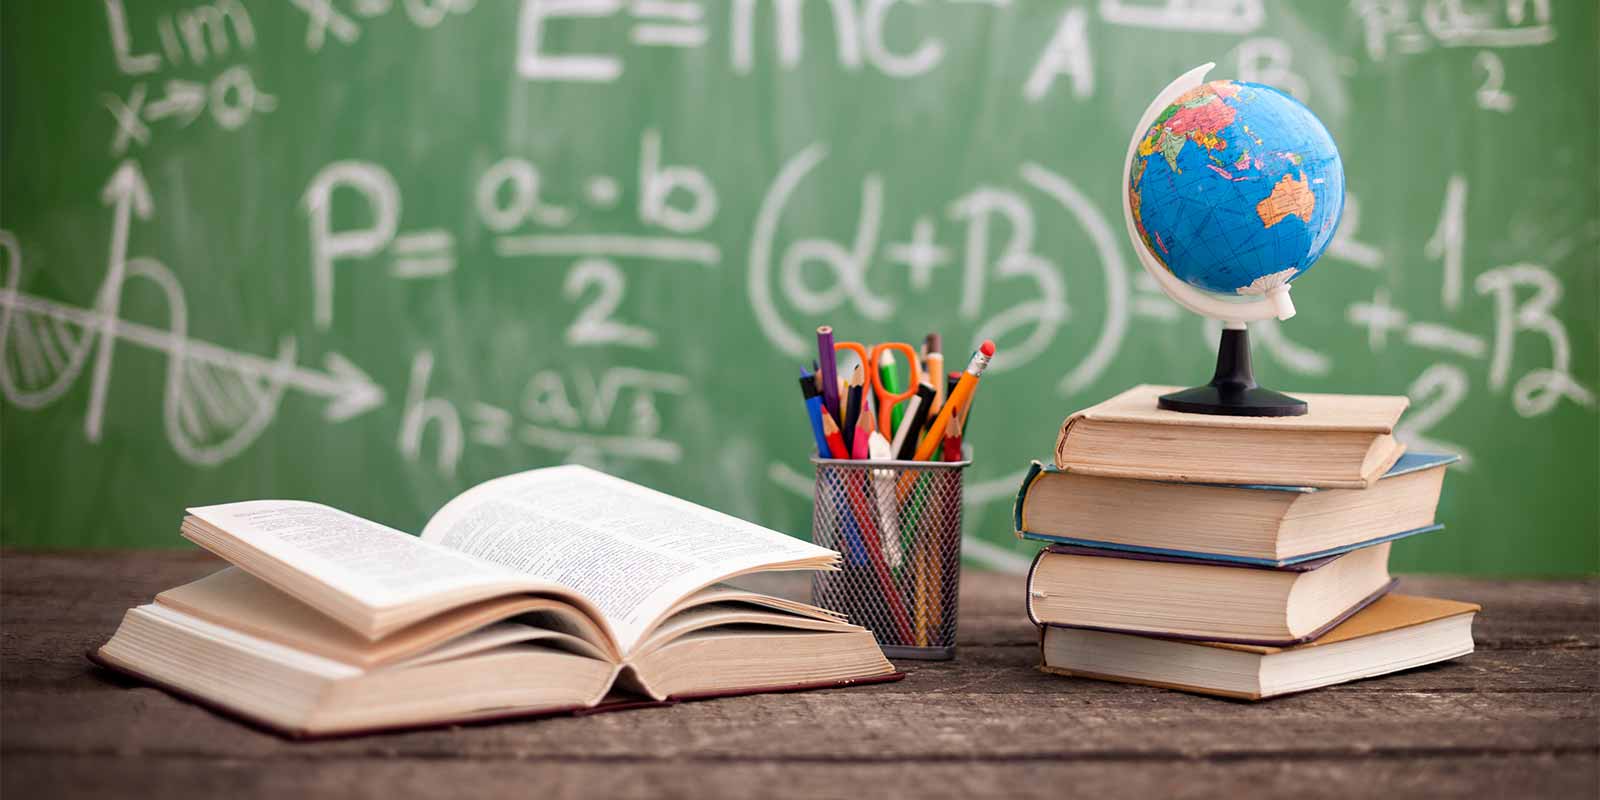 School books with pens and globe in front of classroom blackboard